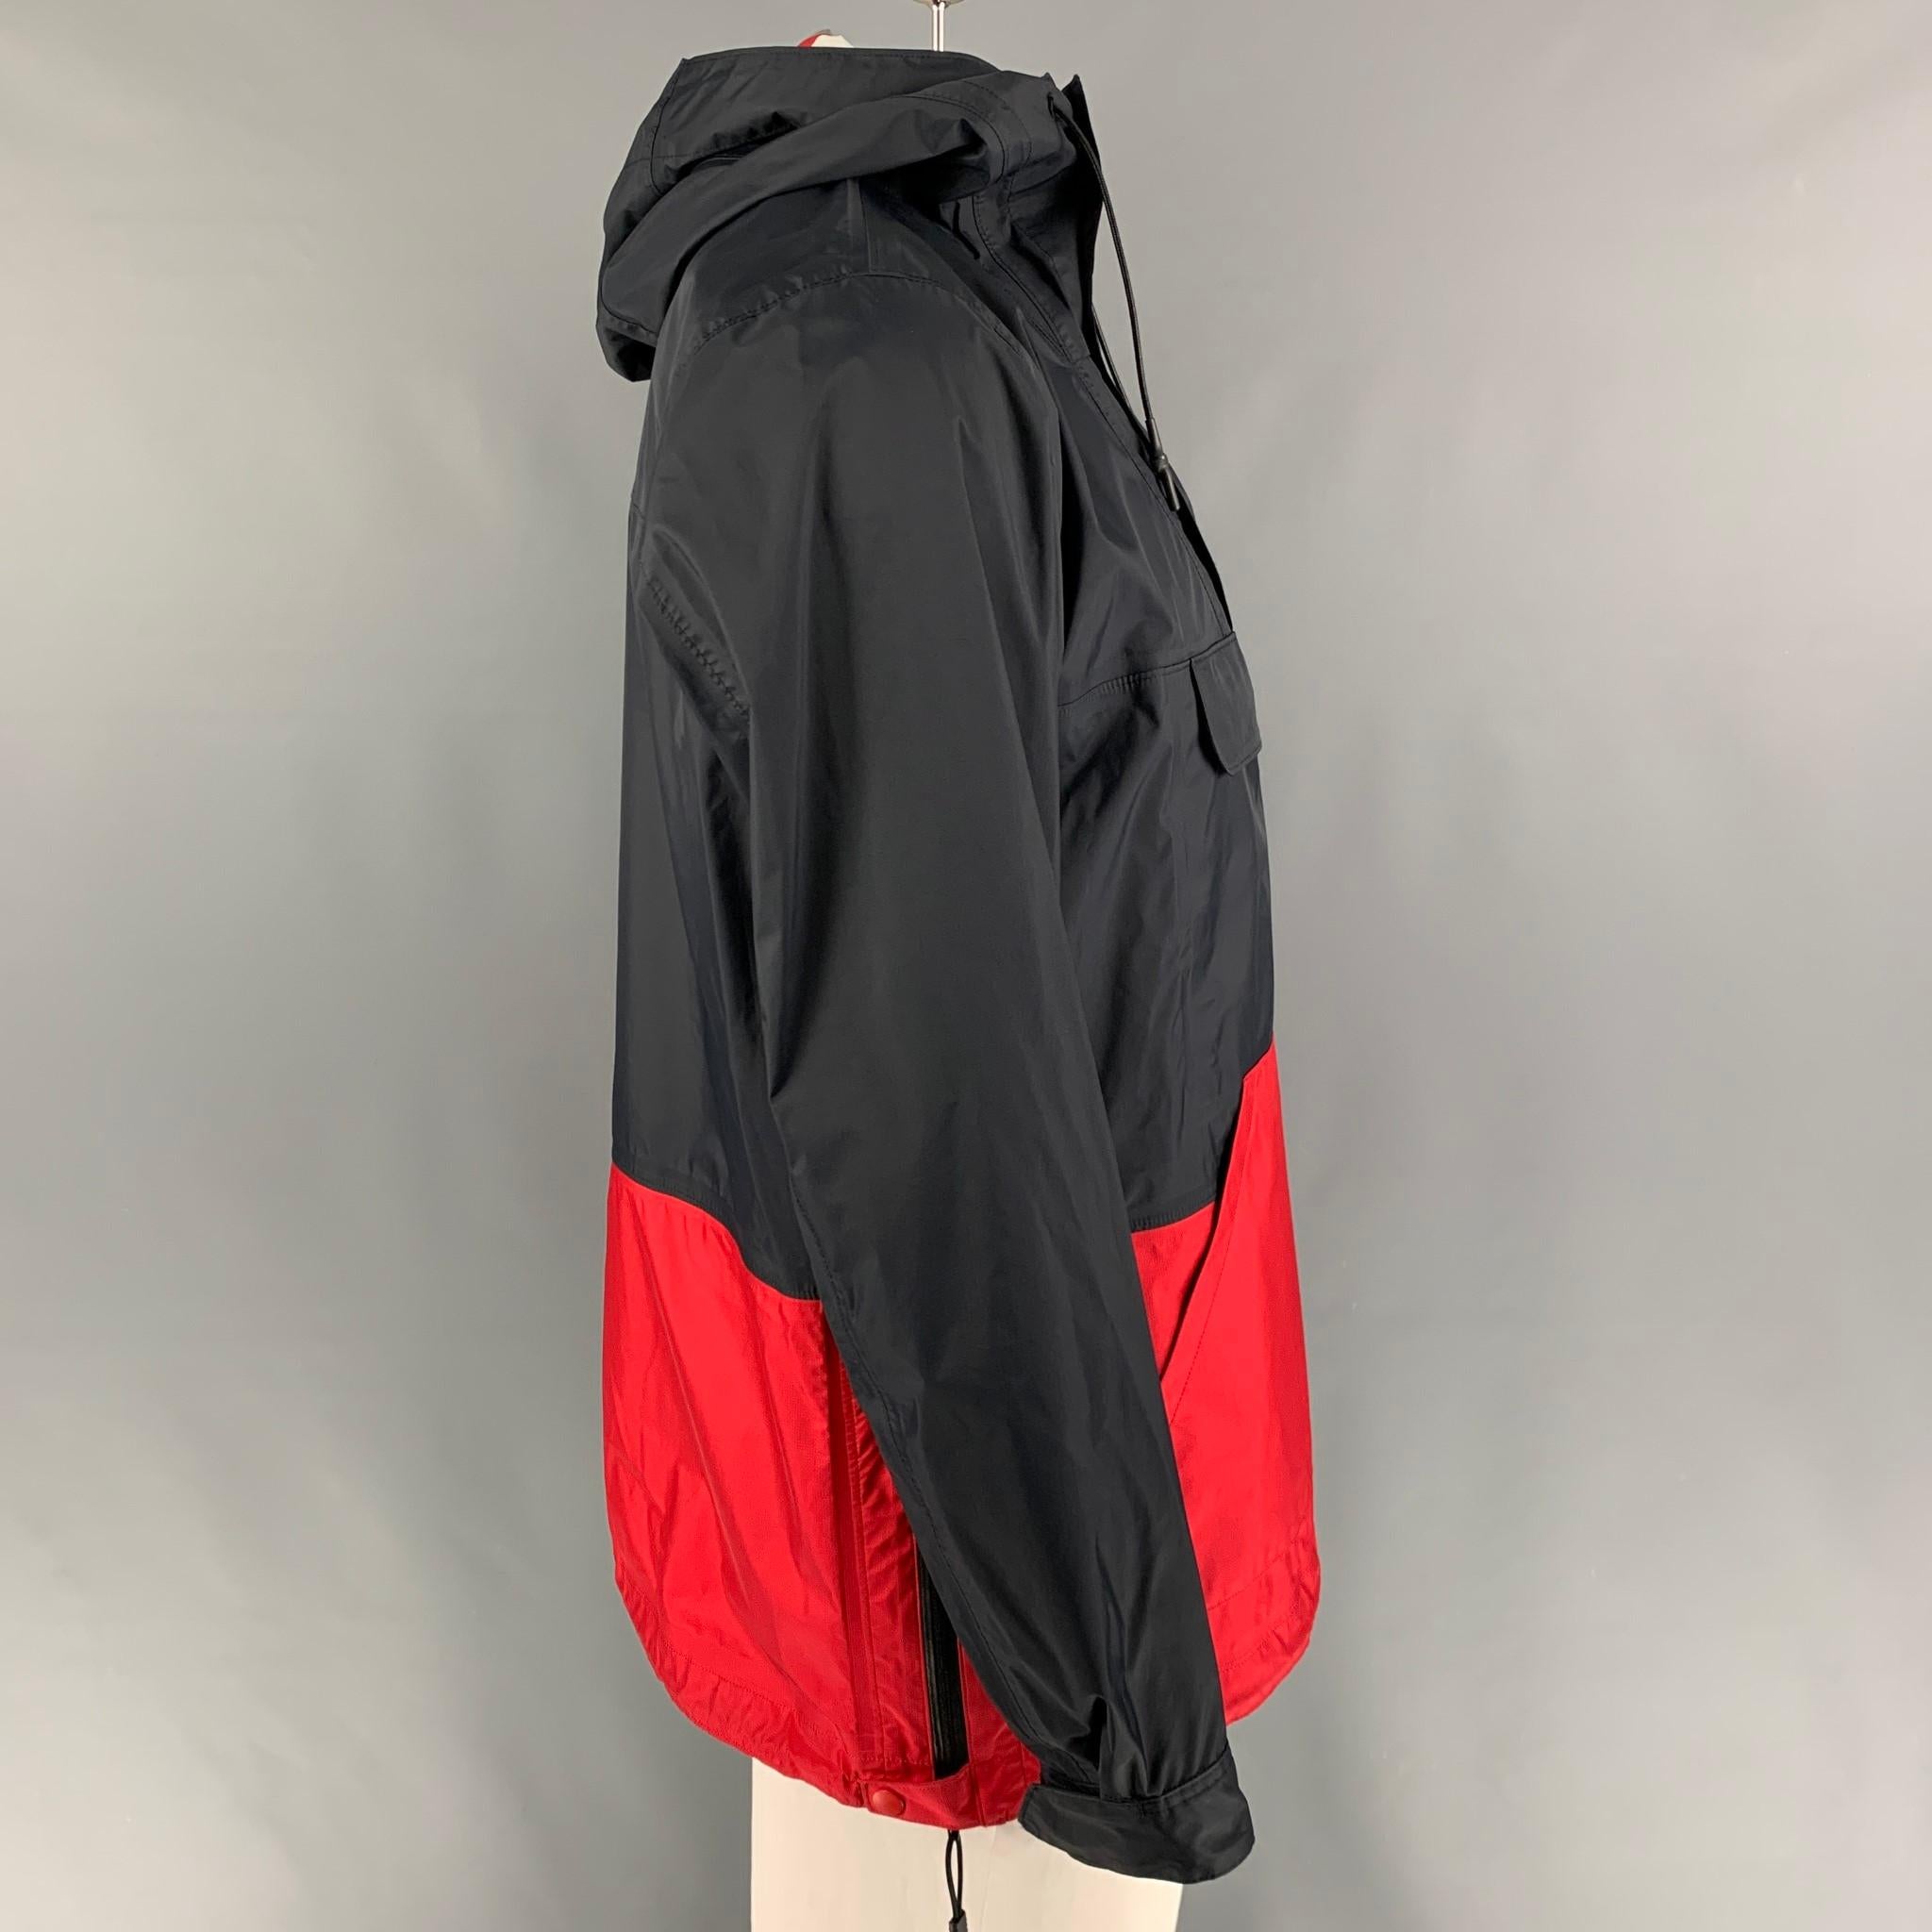 COMME des GARCONS HOMME jacket comes in a navy & red color block nylon featuring a windbreaker style, hooded, front pockets, drawstring, and a half zip up closure. Made in Japan. 

Very Good Pre-Owned Condition.
Marked: L

Measurements:

Shoulder: